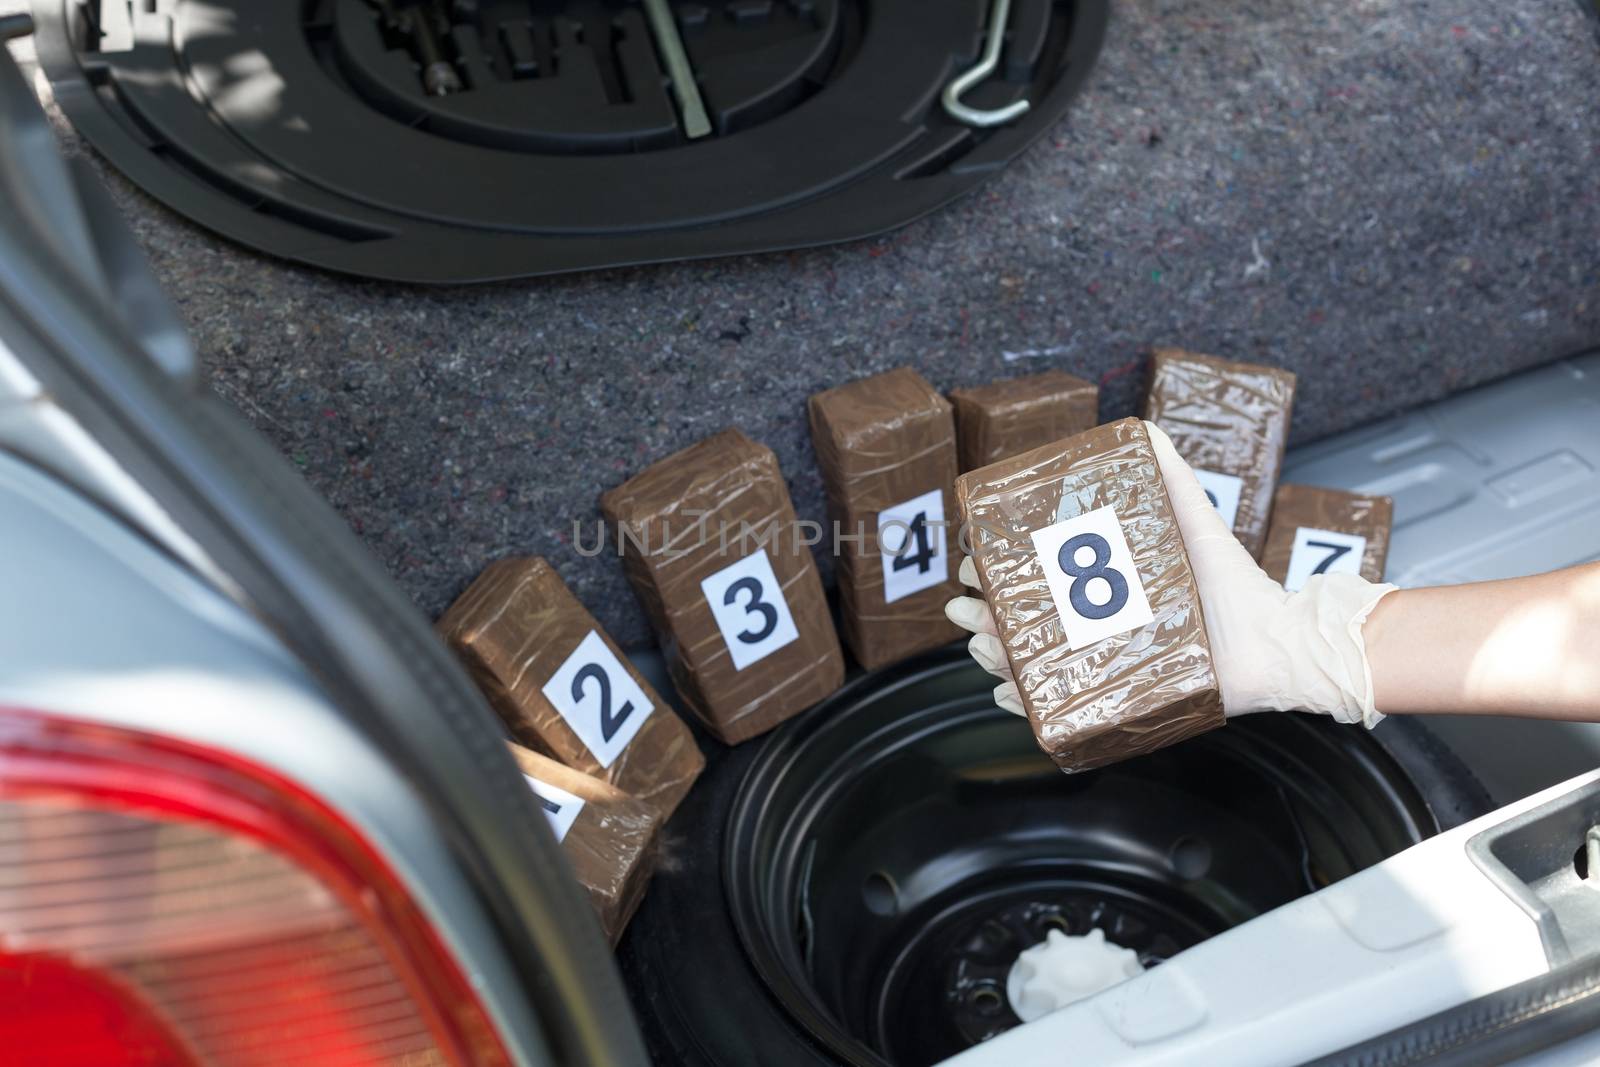 Police officer holding drug package discovered in the trunk of a car by wellphoto